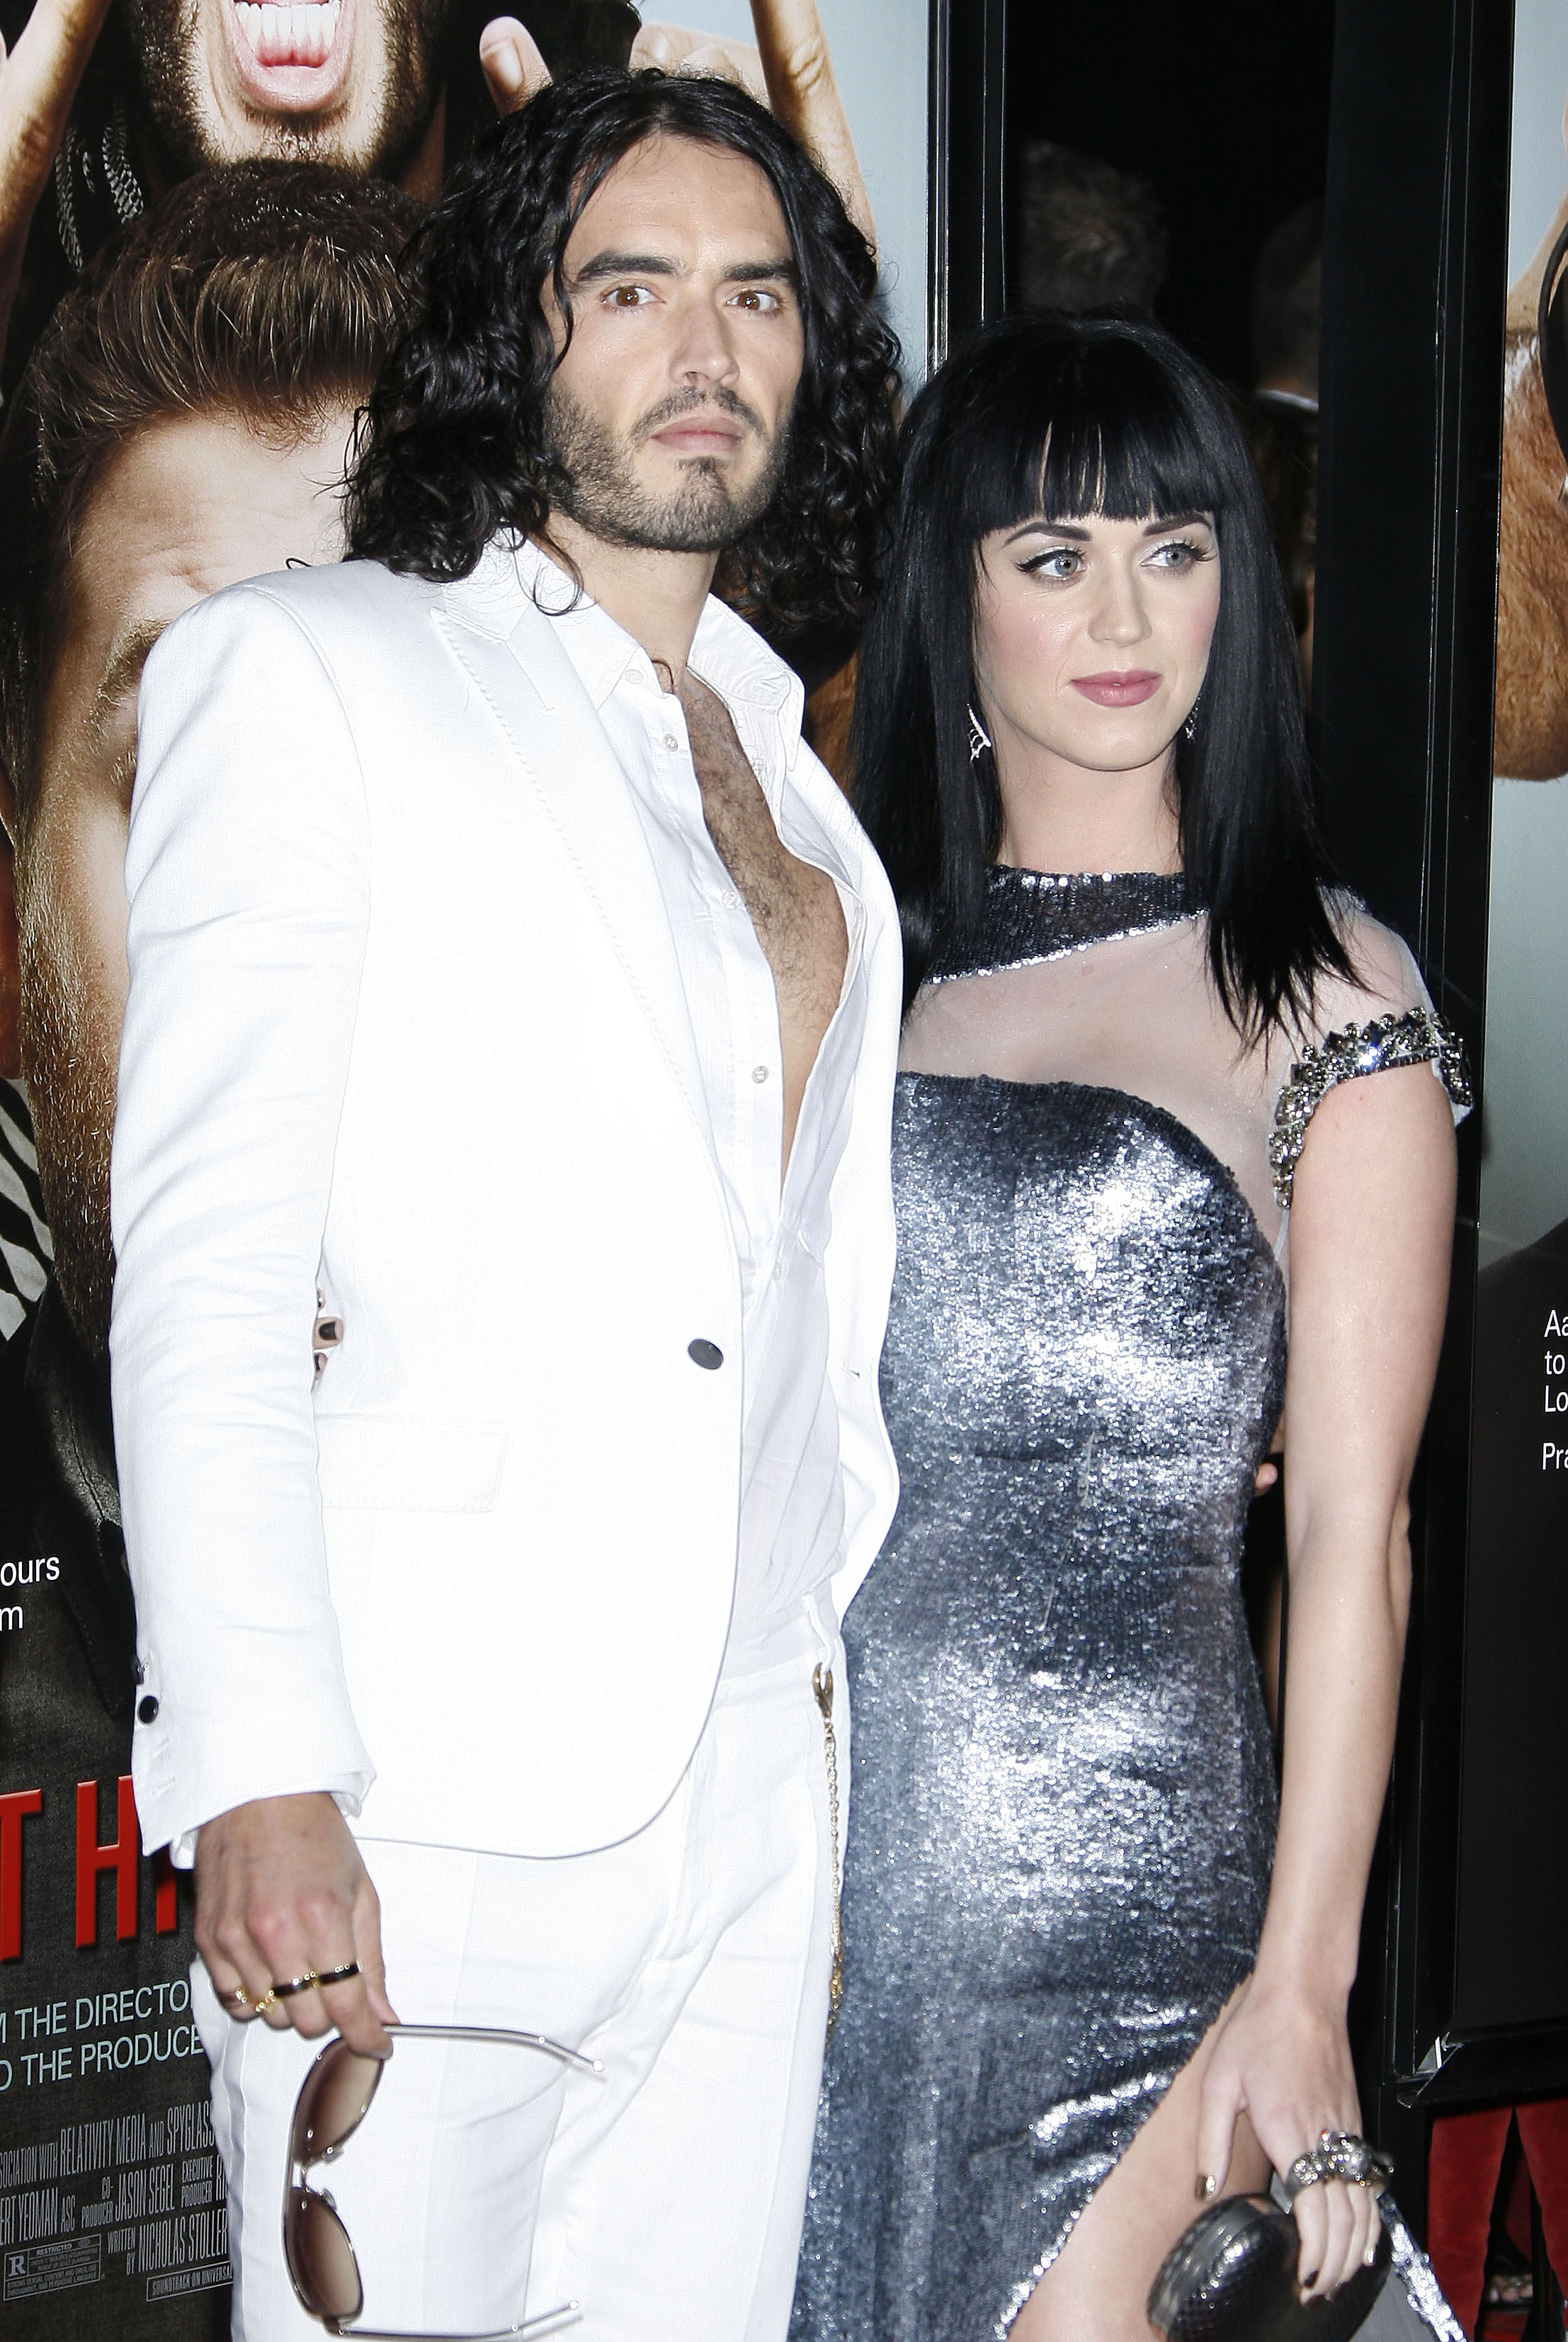 Katy Perry - 'Get Him To The Greek' Premiere in LA - May 2010 - GotCeleb